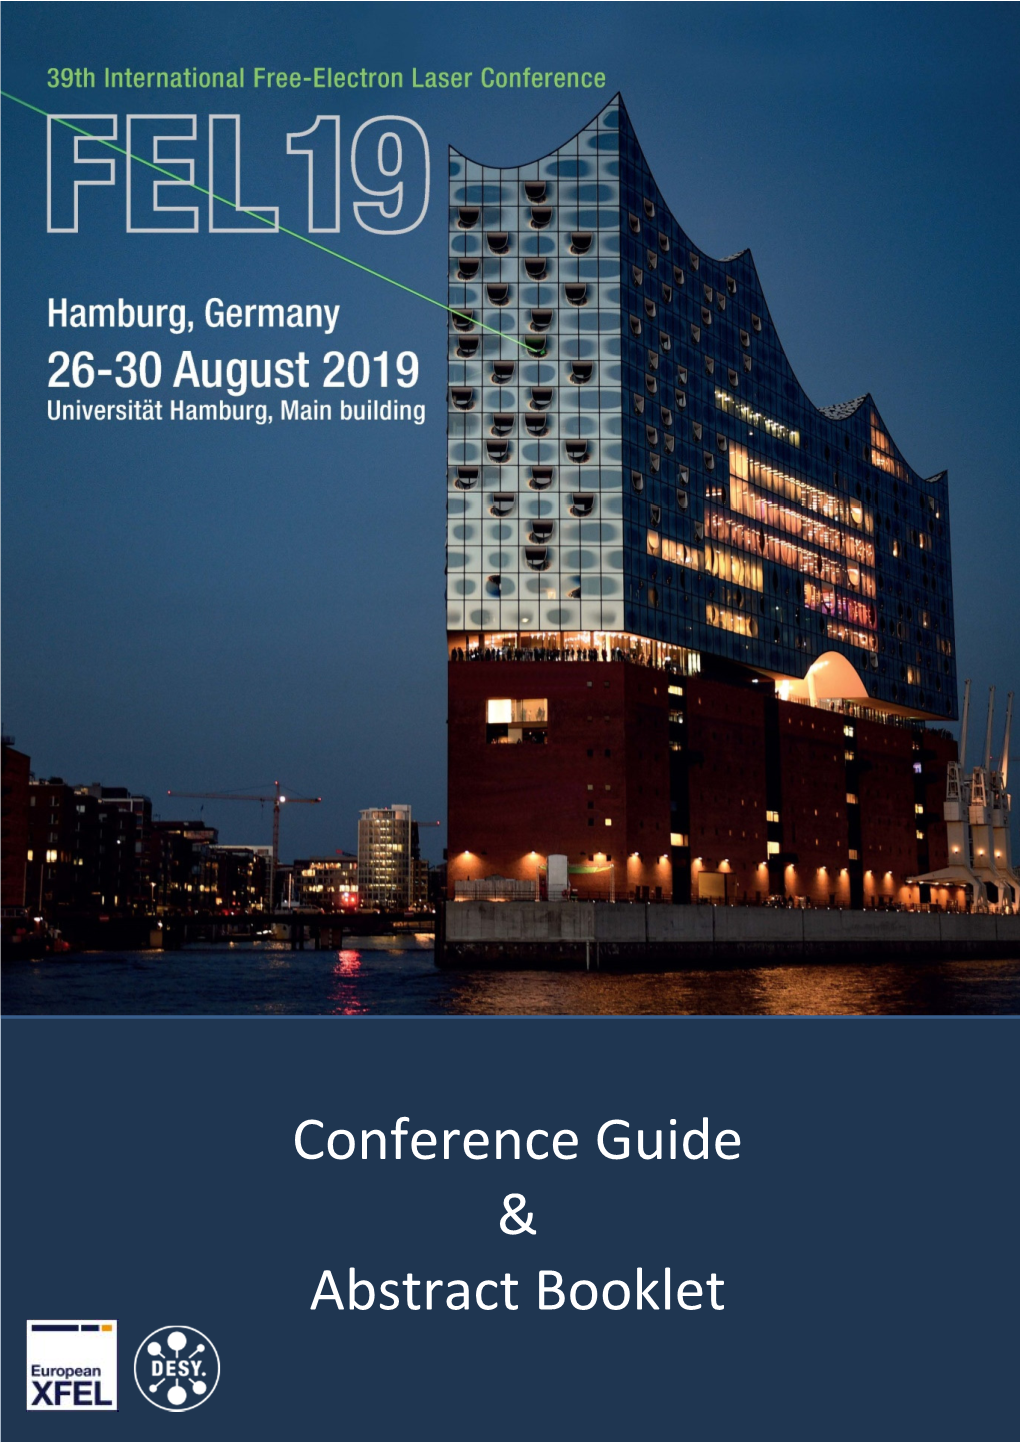 Conference Guide & Abstract Booklet